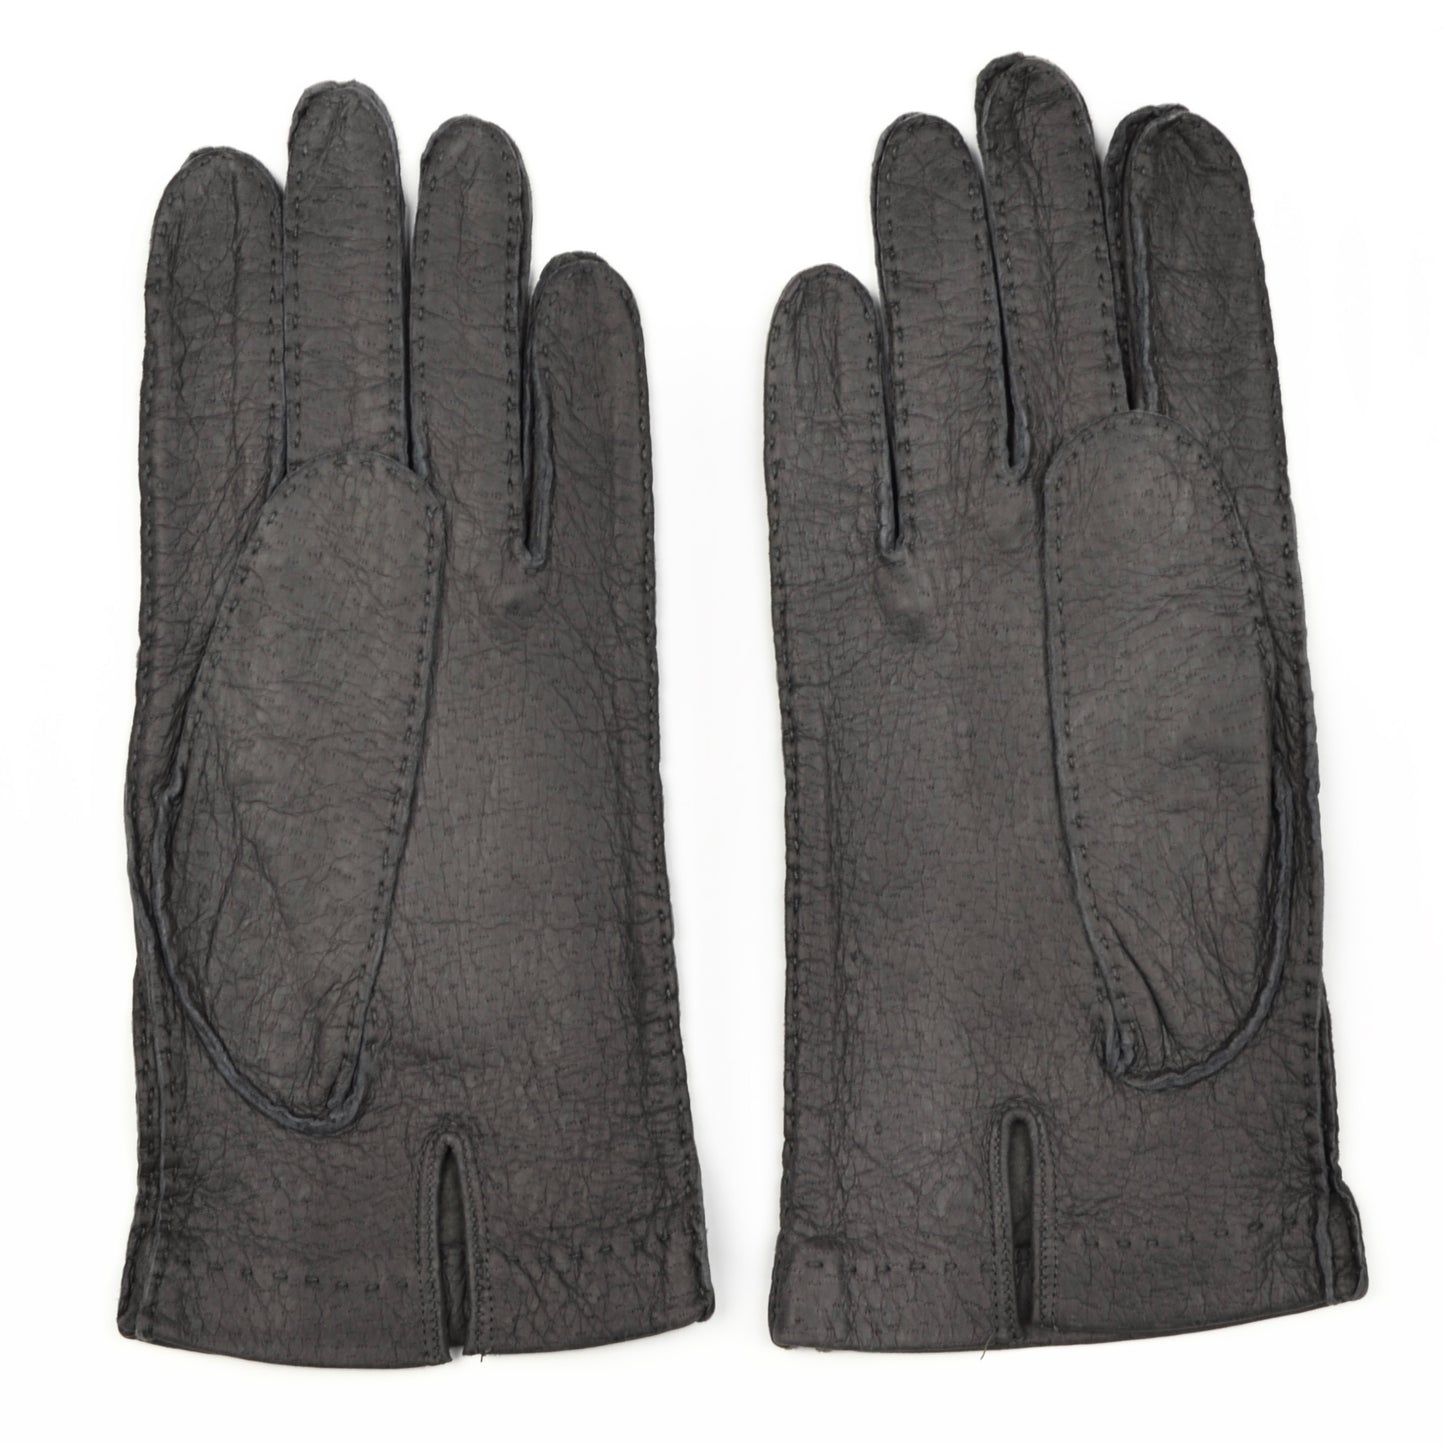 Unlined Peccary Gloves Size 8 3/4 - Grey